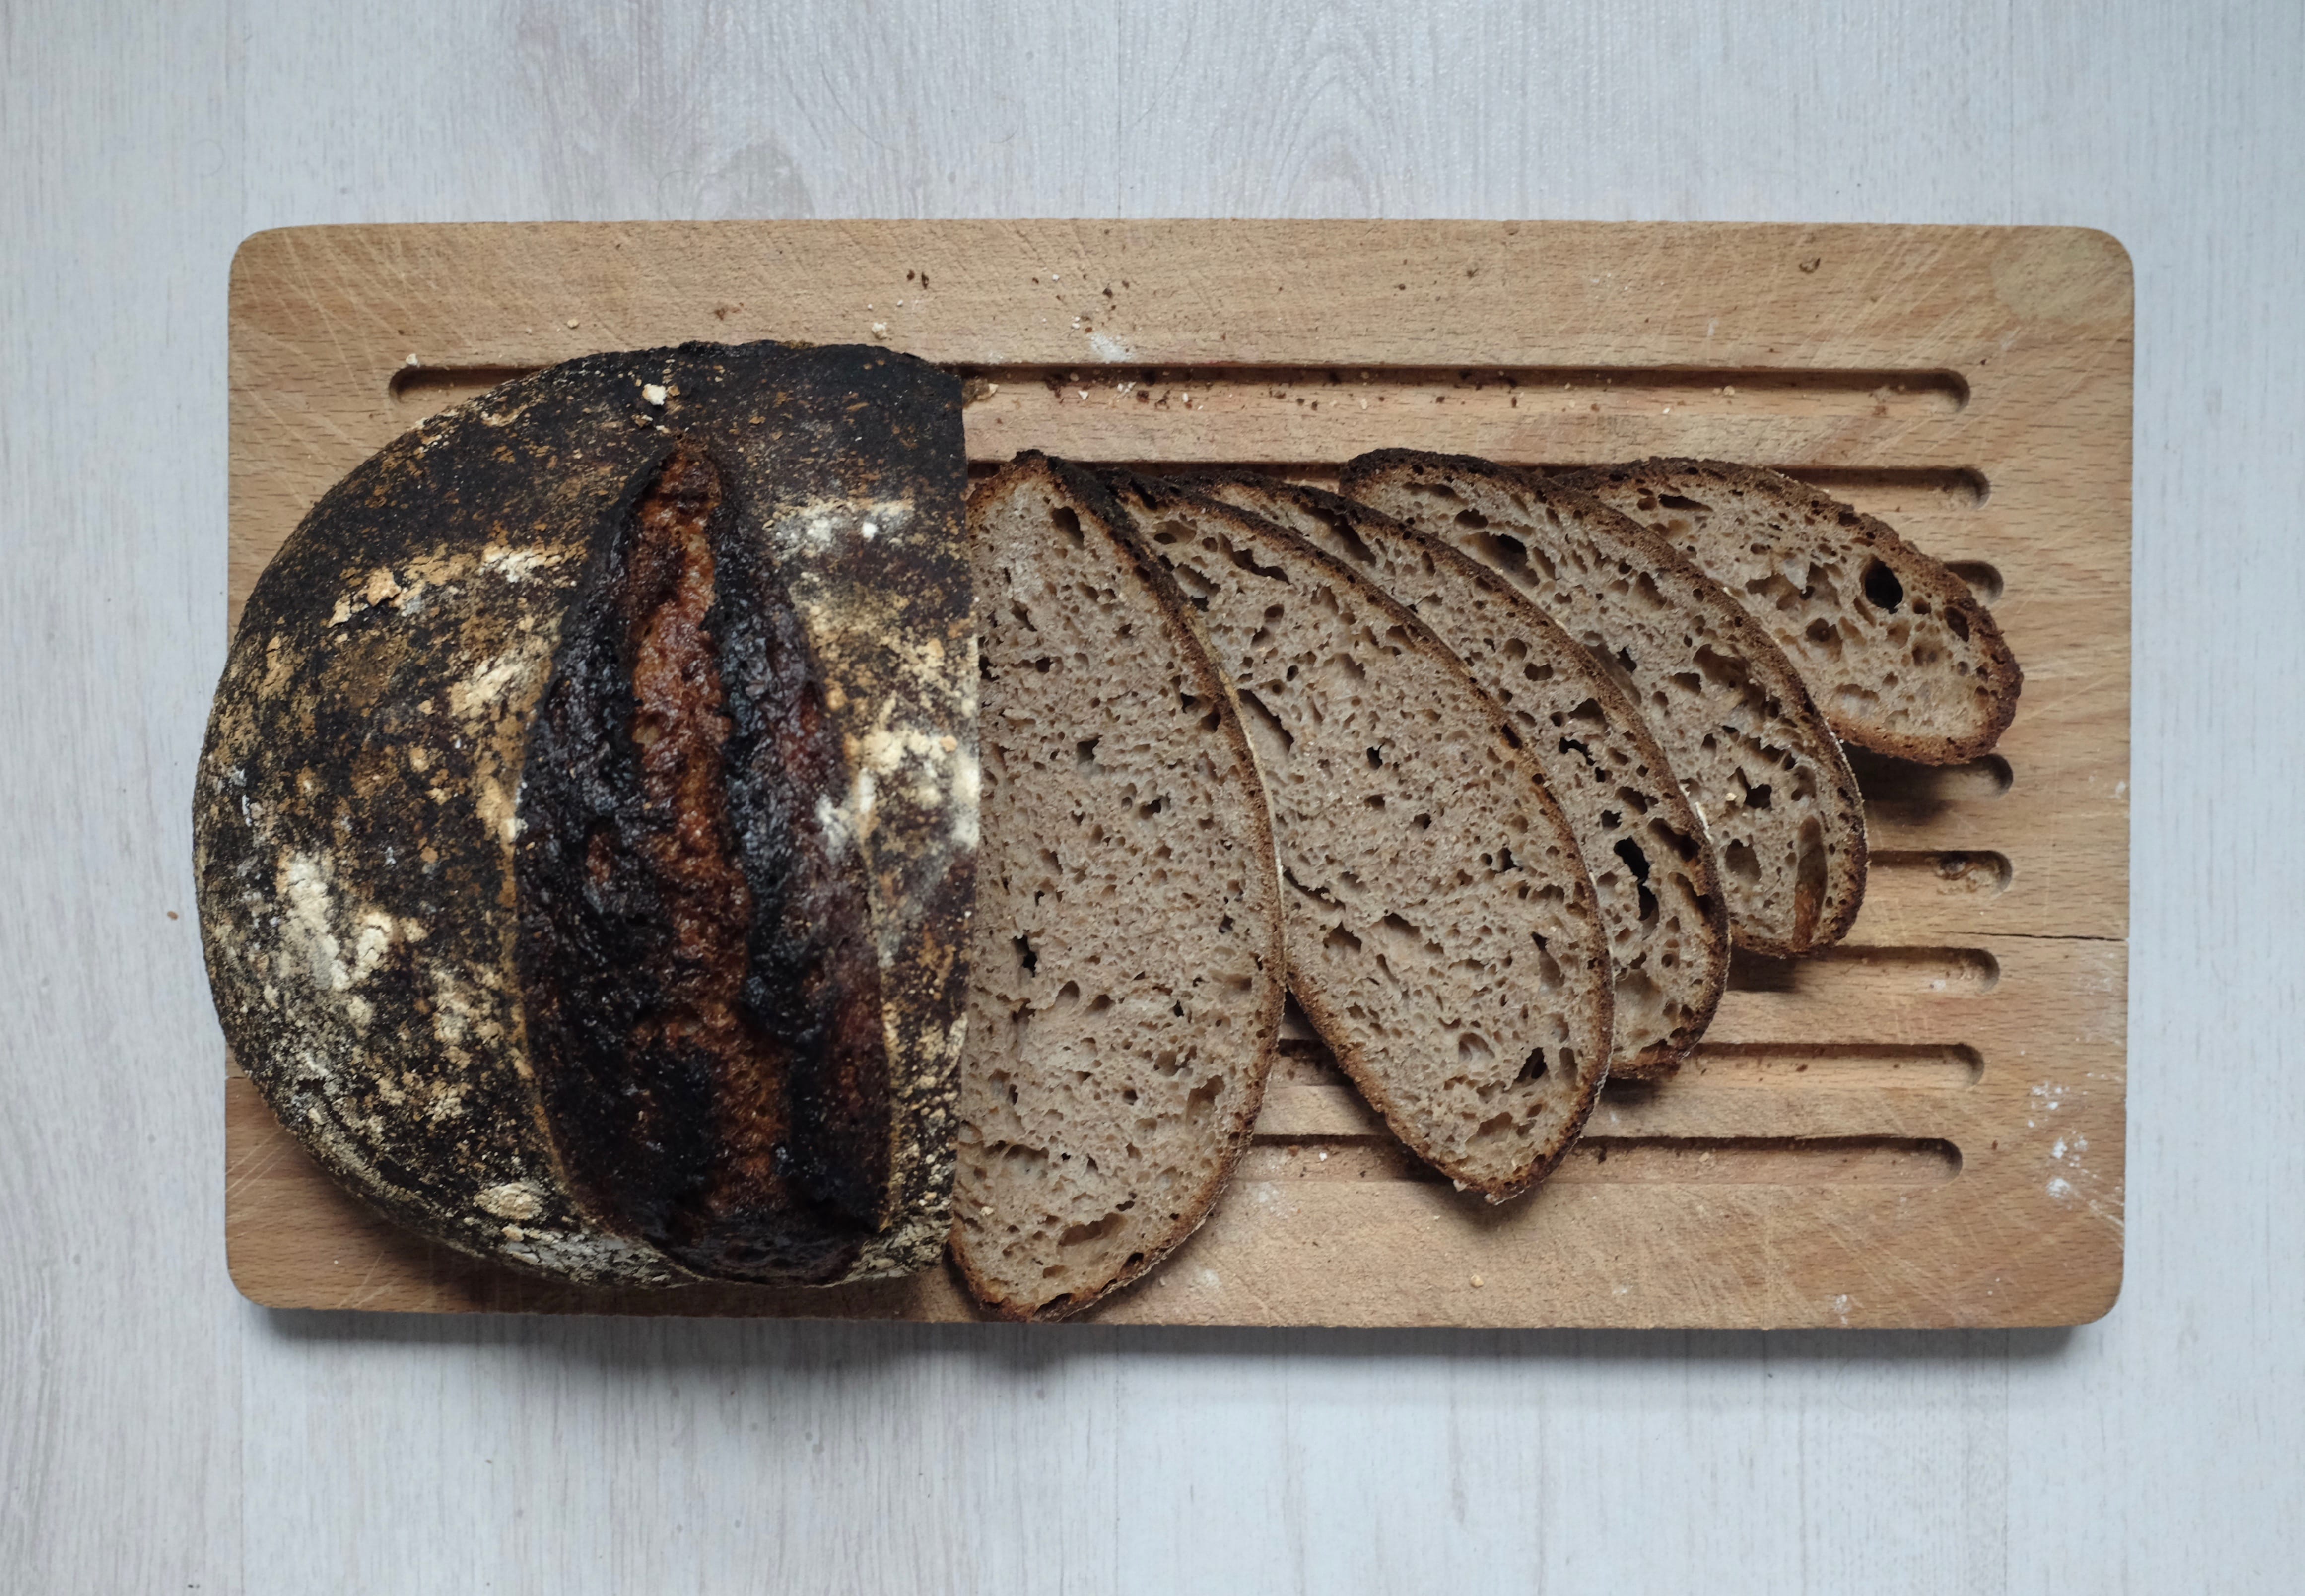 An image of a bread called “Old Leaven Wholemeal & Rye”